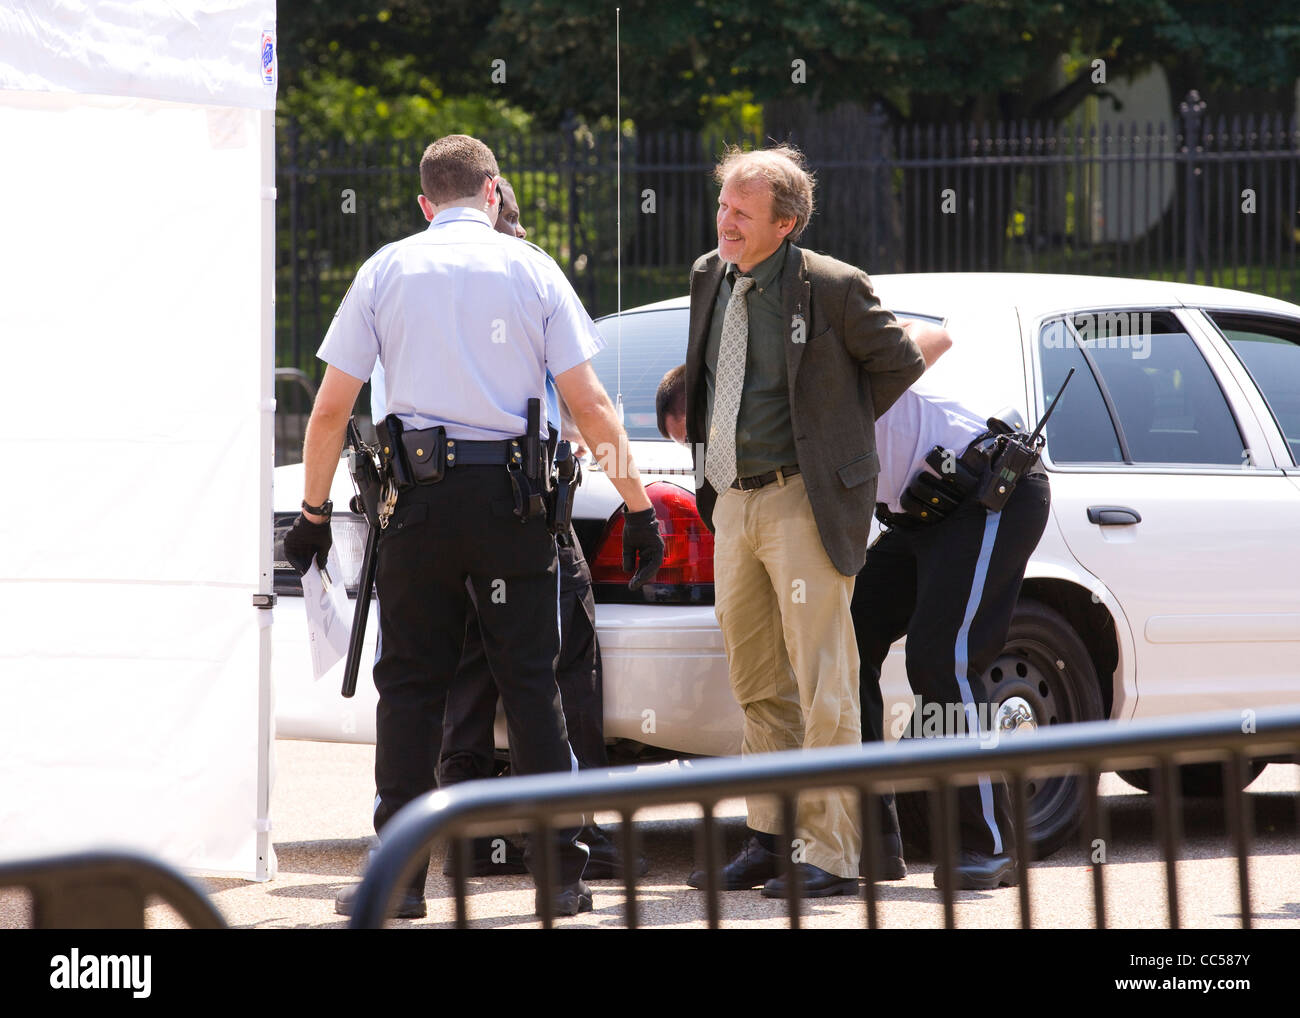 A white male handcuffed and patted down by police - Washington, DC USA Stock Photo